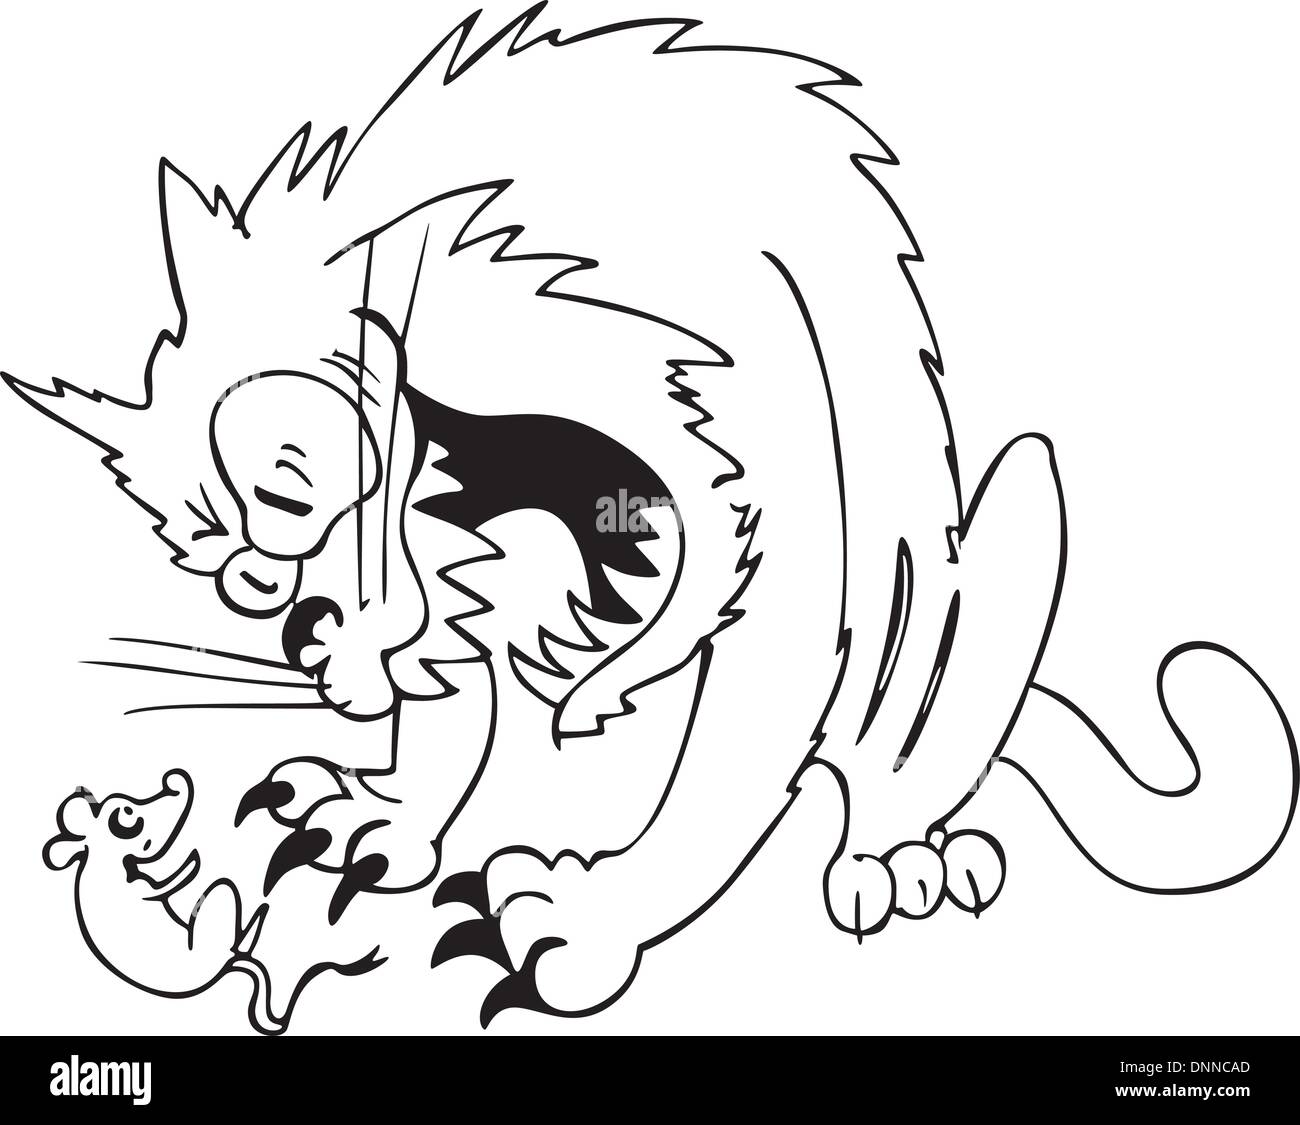 Aggressive Cat Caught A Mouse Cartoon Black And White Vector Stock Vector Image Art Alamy